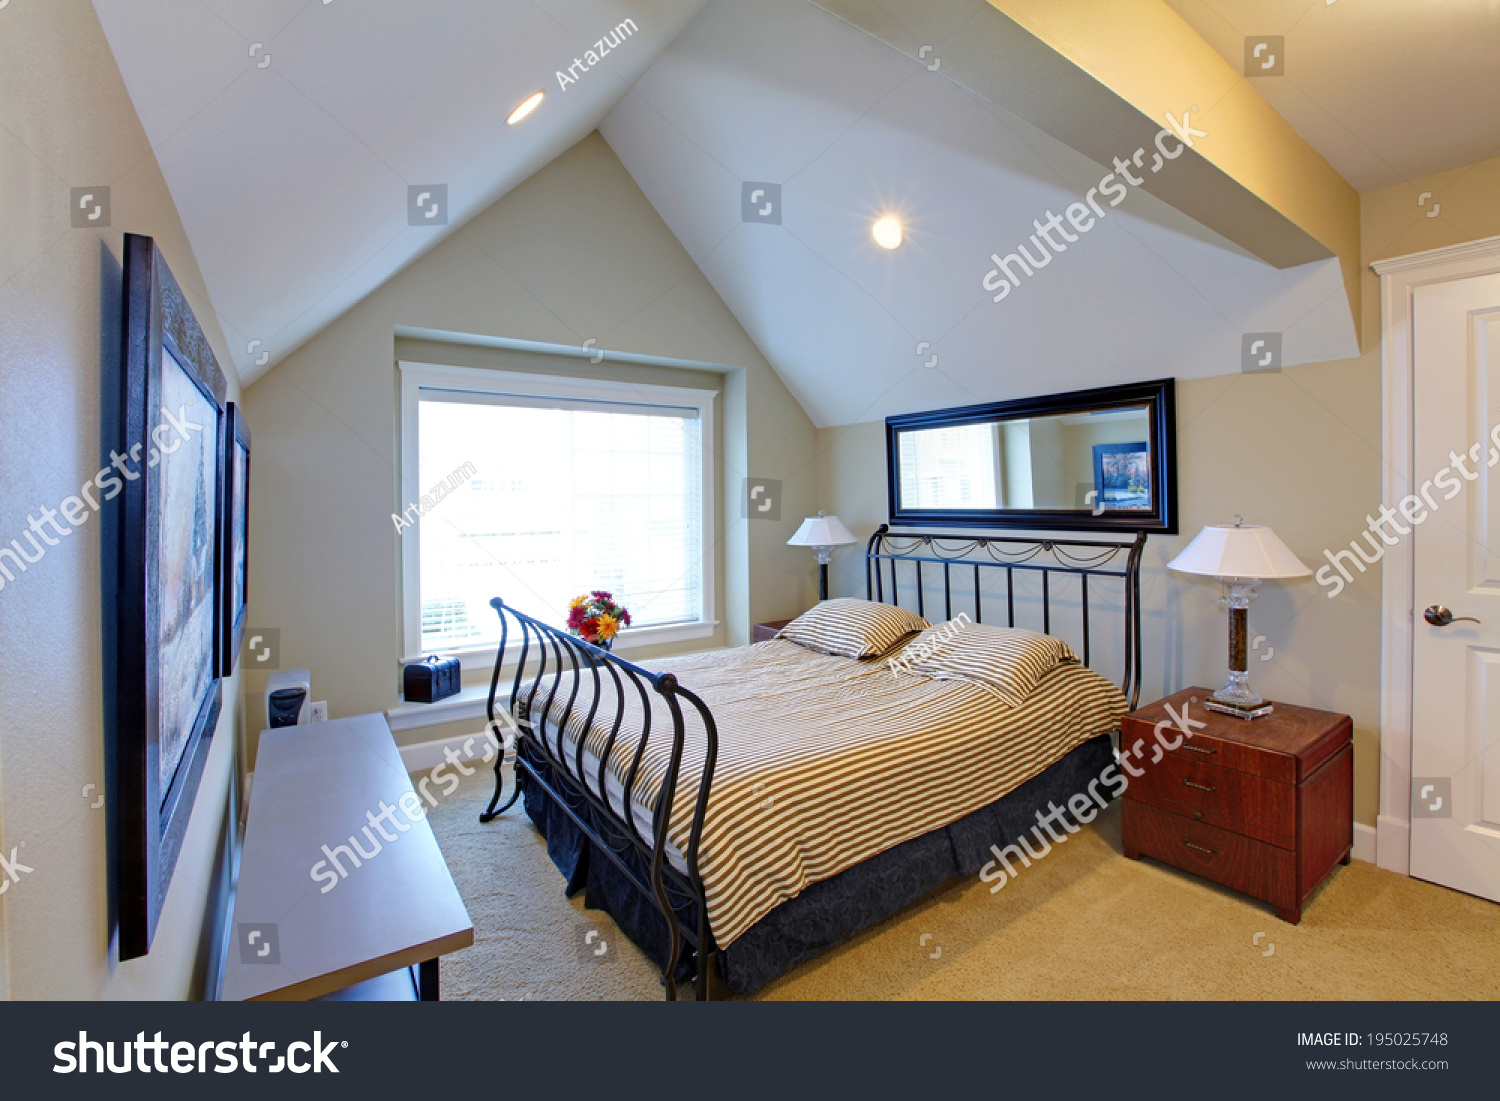 Small Bedroom Vaulted Ceiling Carpet Floor Royalty Free Stock Image